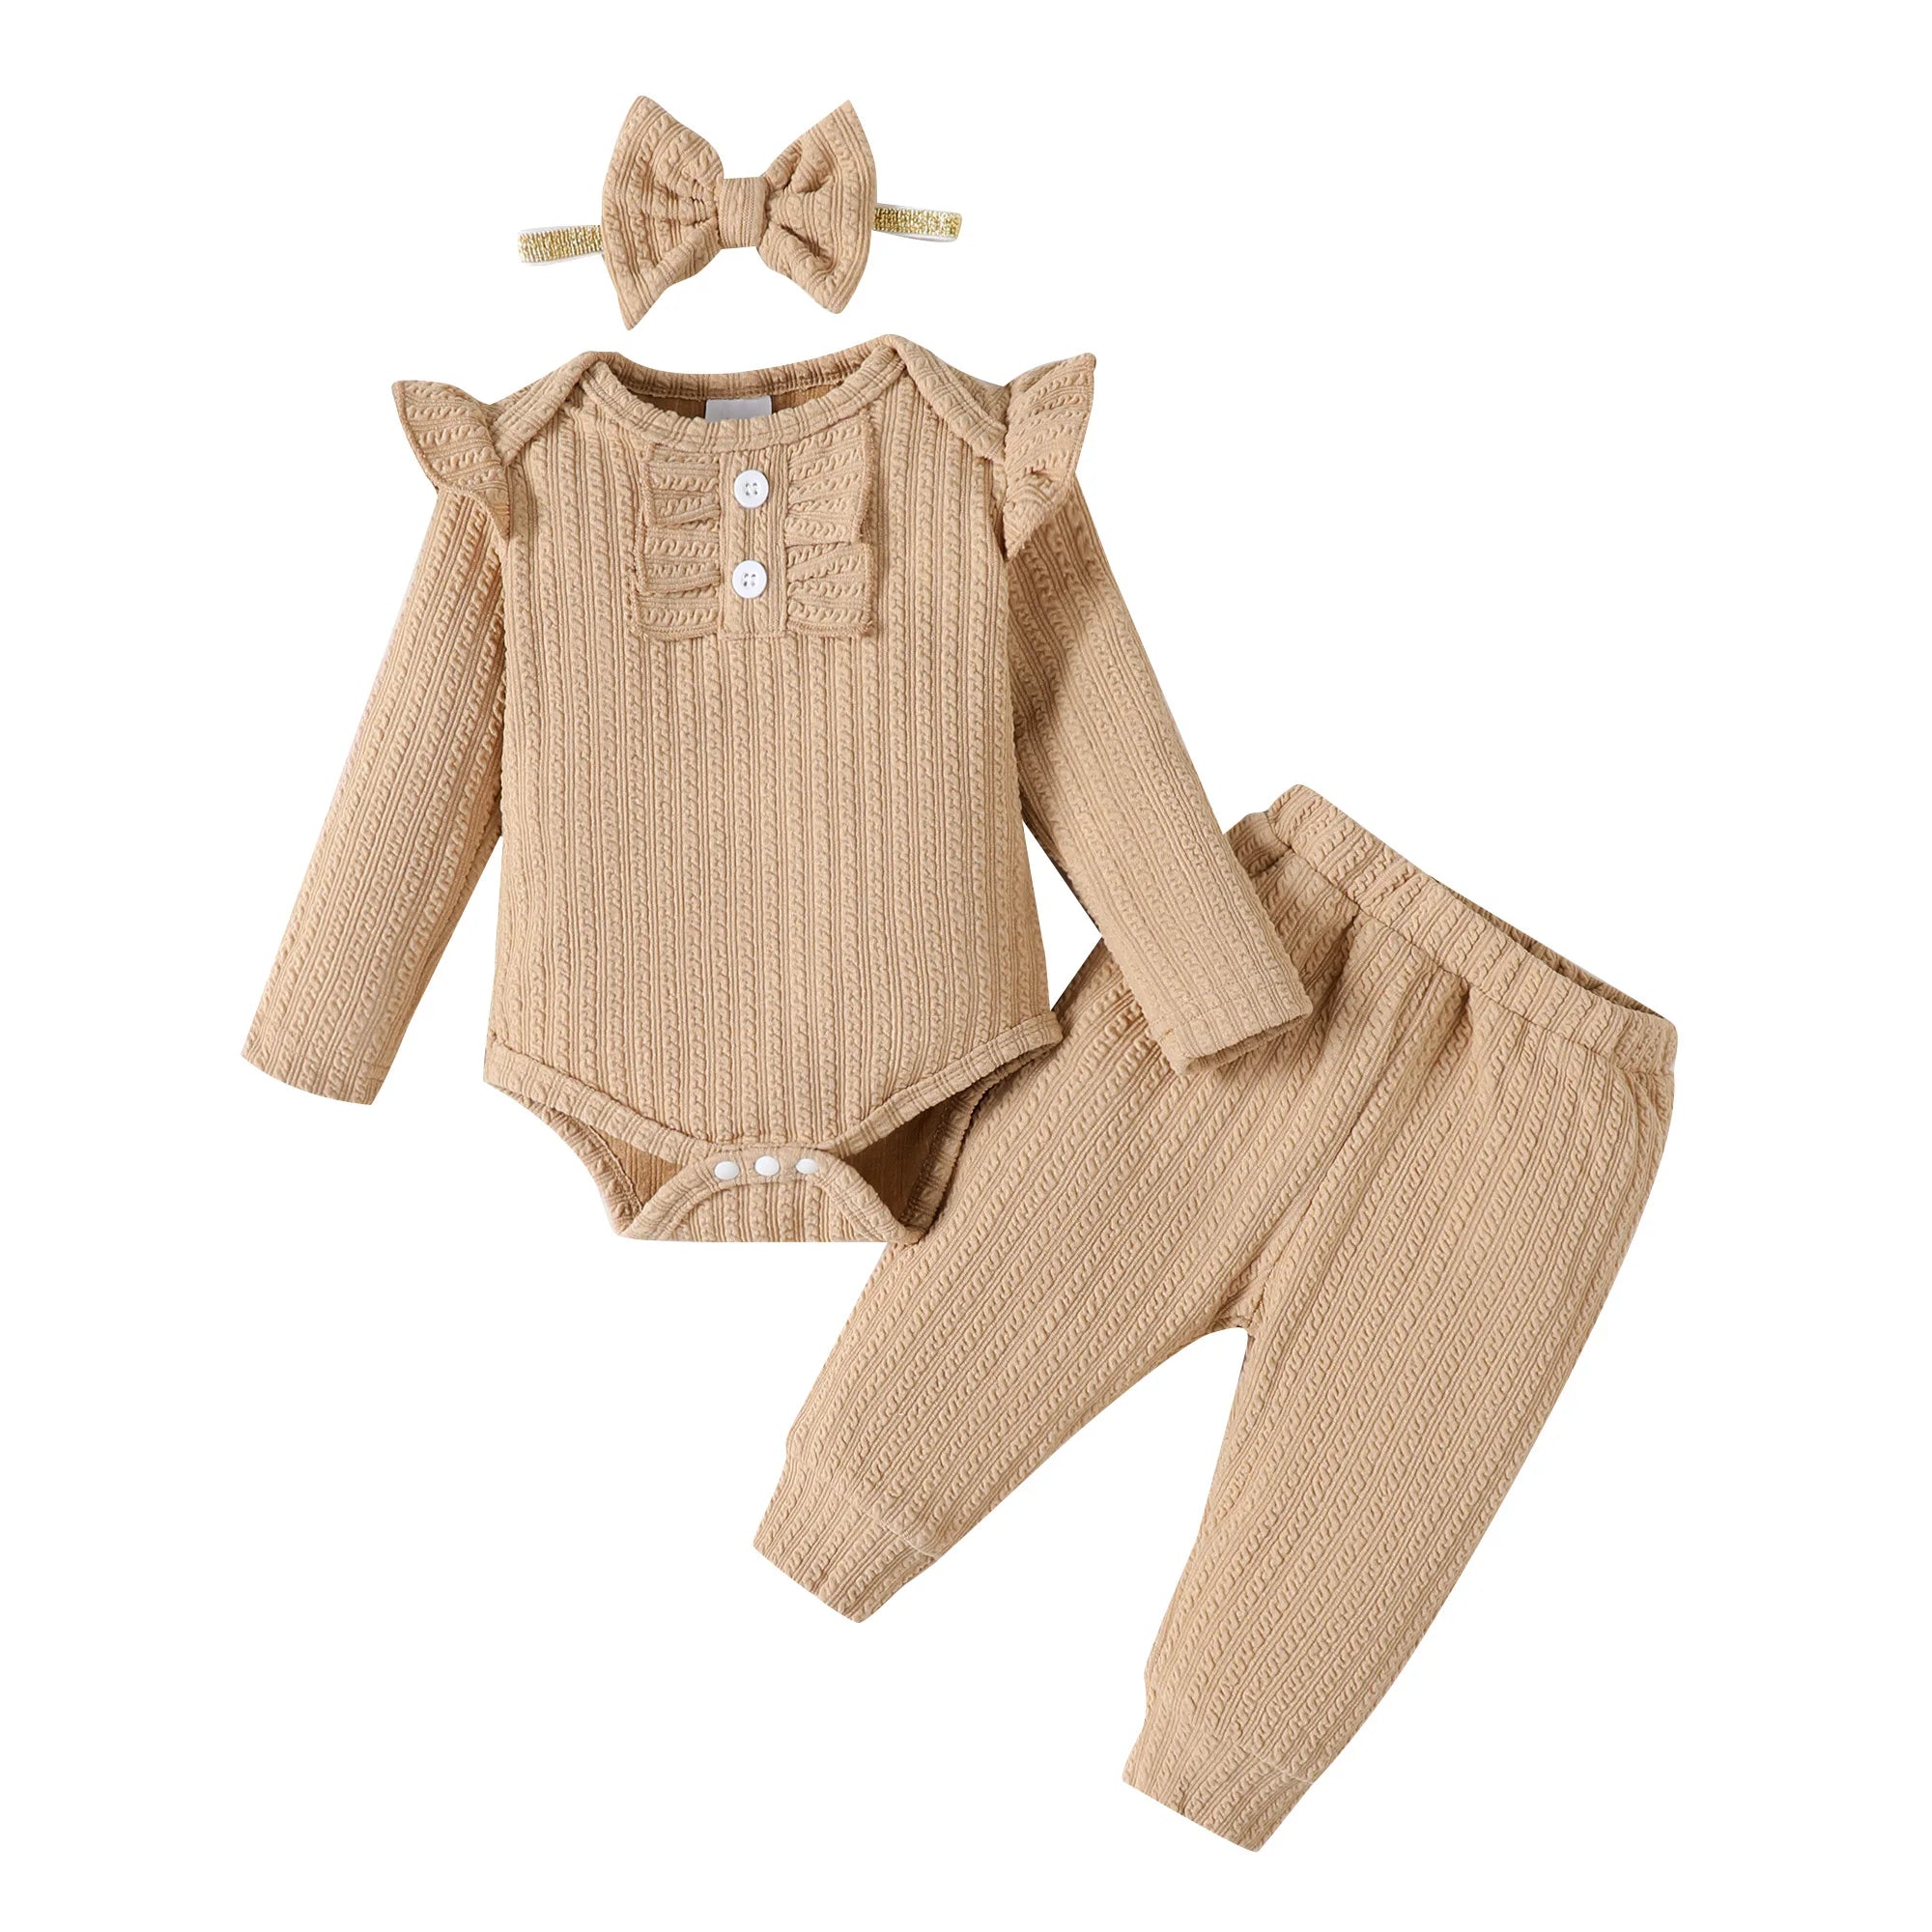 0-18M Custom design Baby romper baby girl 3pcs long sleeve cotton new born baby rompers set  ODM&OEM baby clothing wholesale Catpapa 132206015